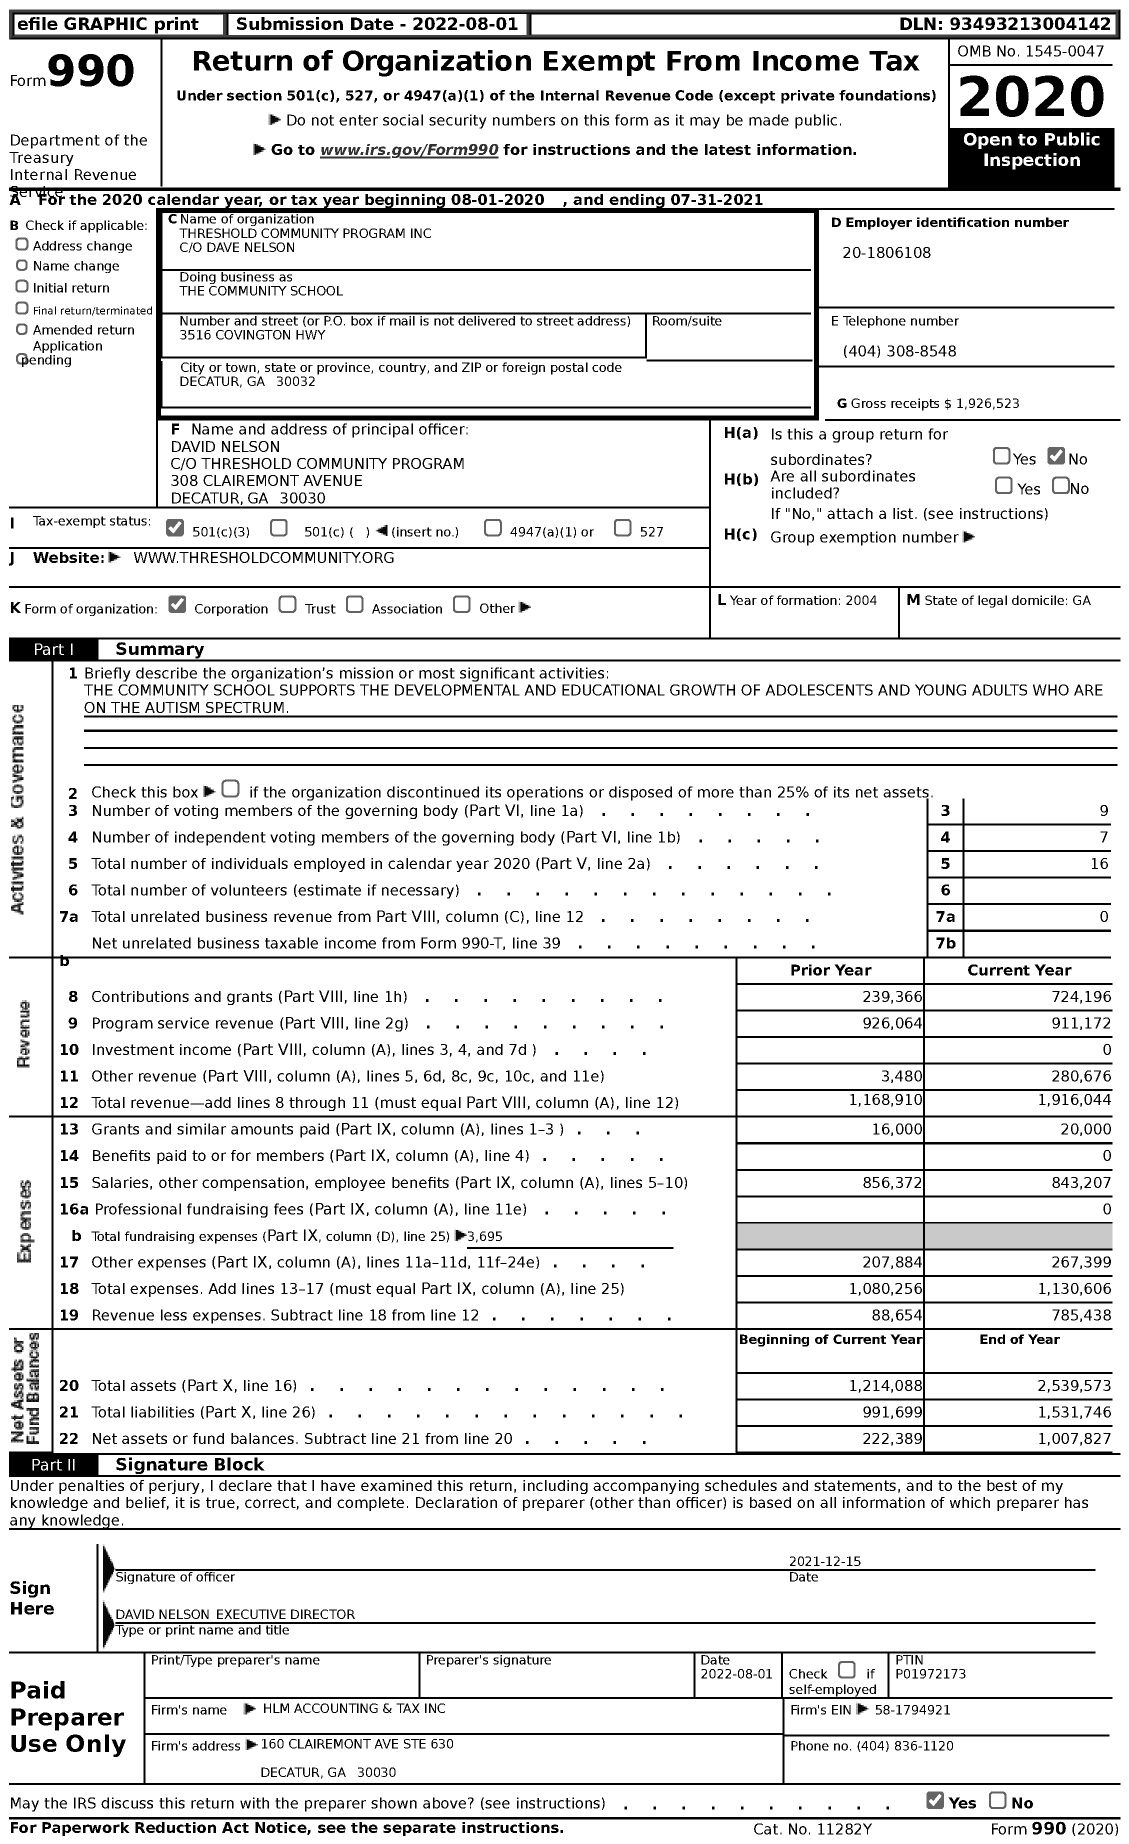 Image of first page of 2020 Form 990 for Threshold Community Program